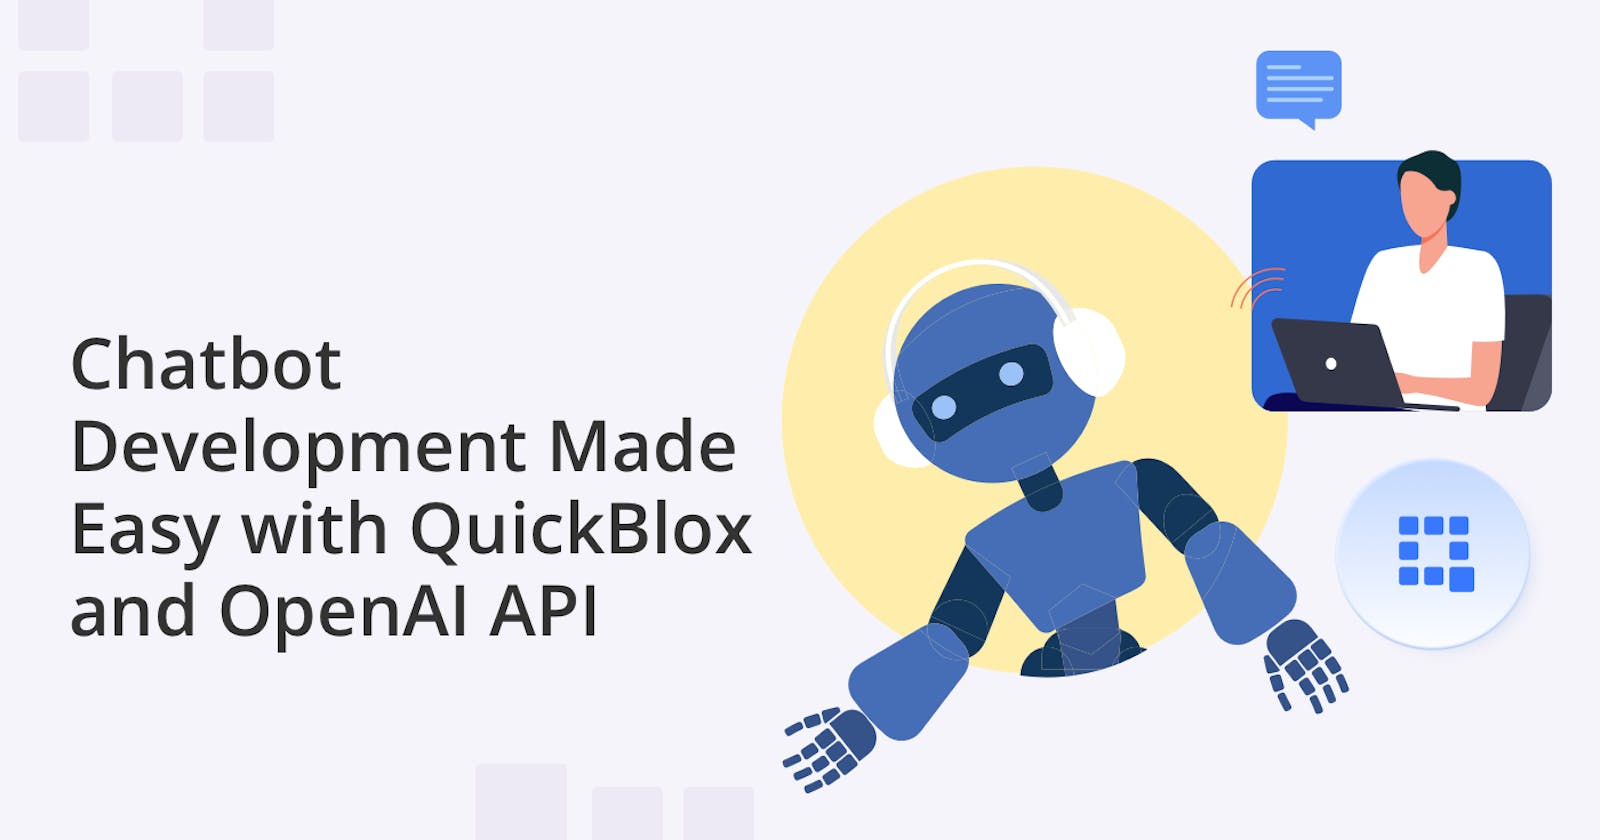 Chatbot Development Made Easy with QuickBlox and OpenAI API